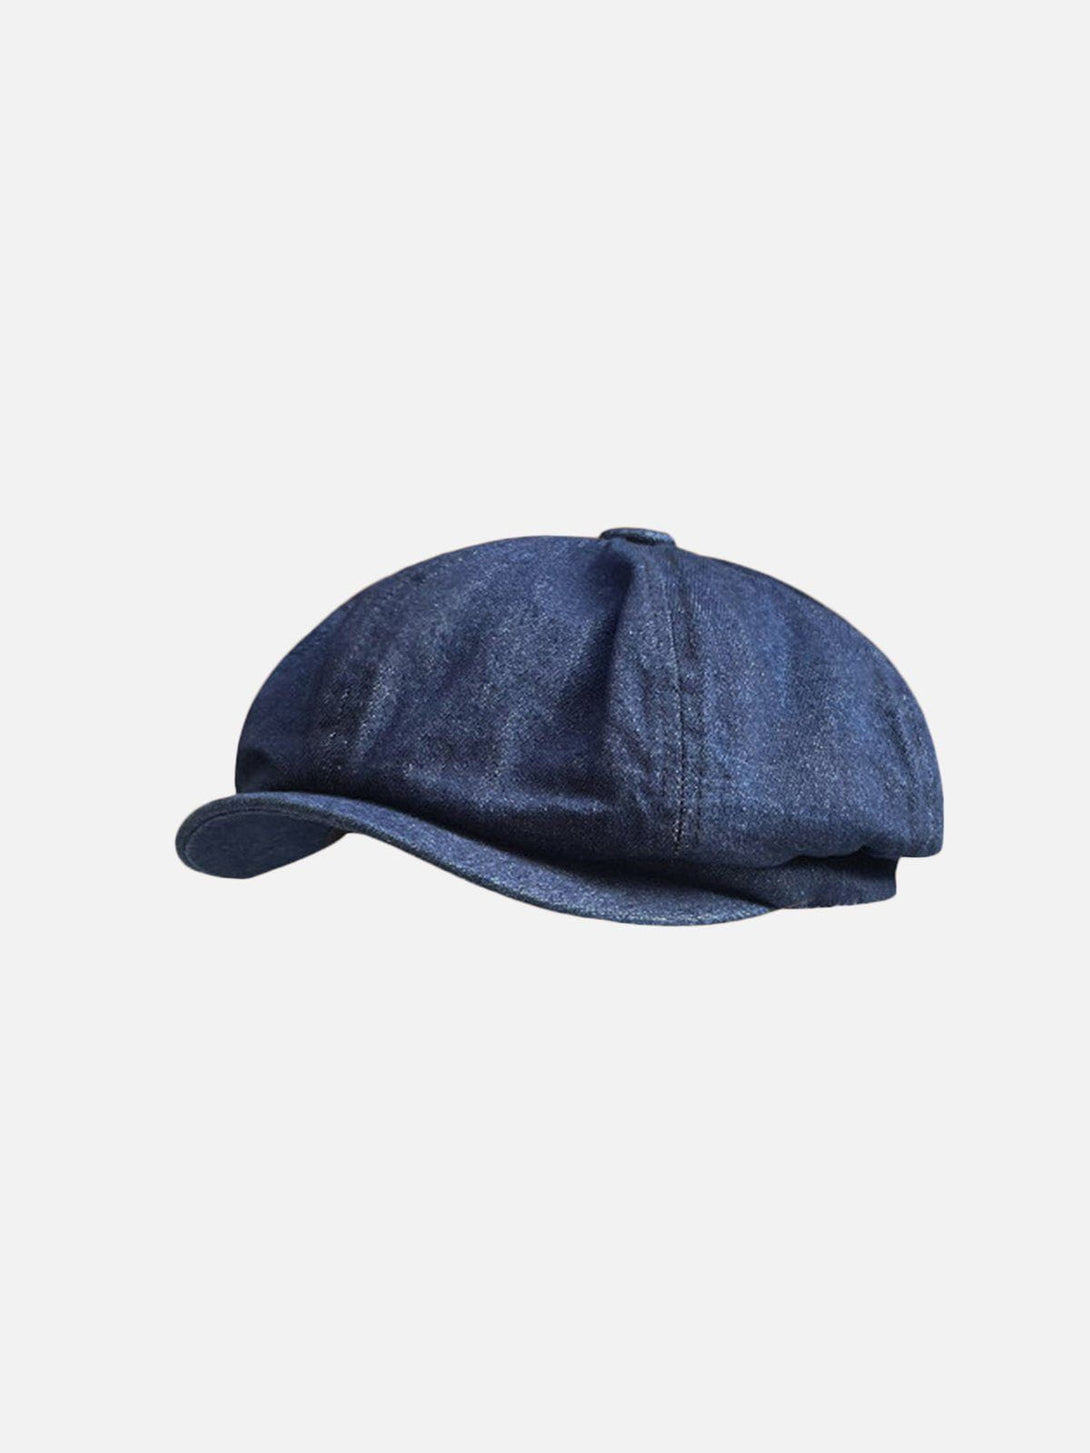 Majesda® - Vintage Solid Washed Casual Hat- Outfit Ideas - Streetwear Fashion - majesda.com